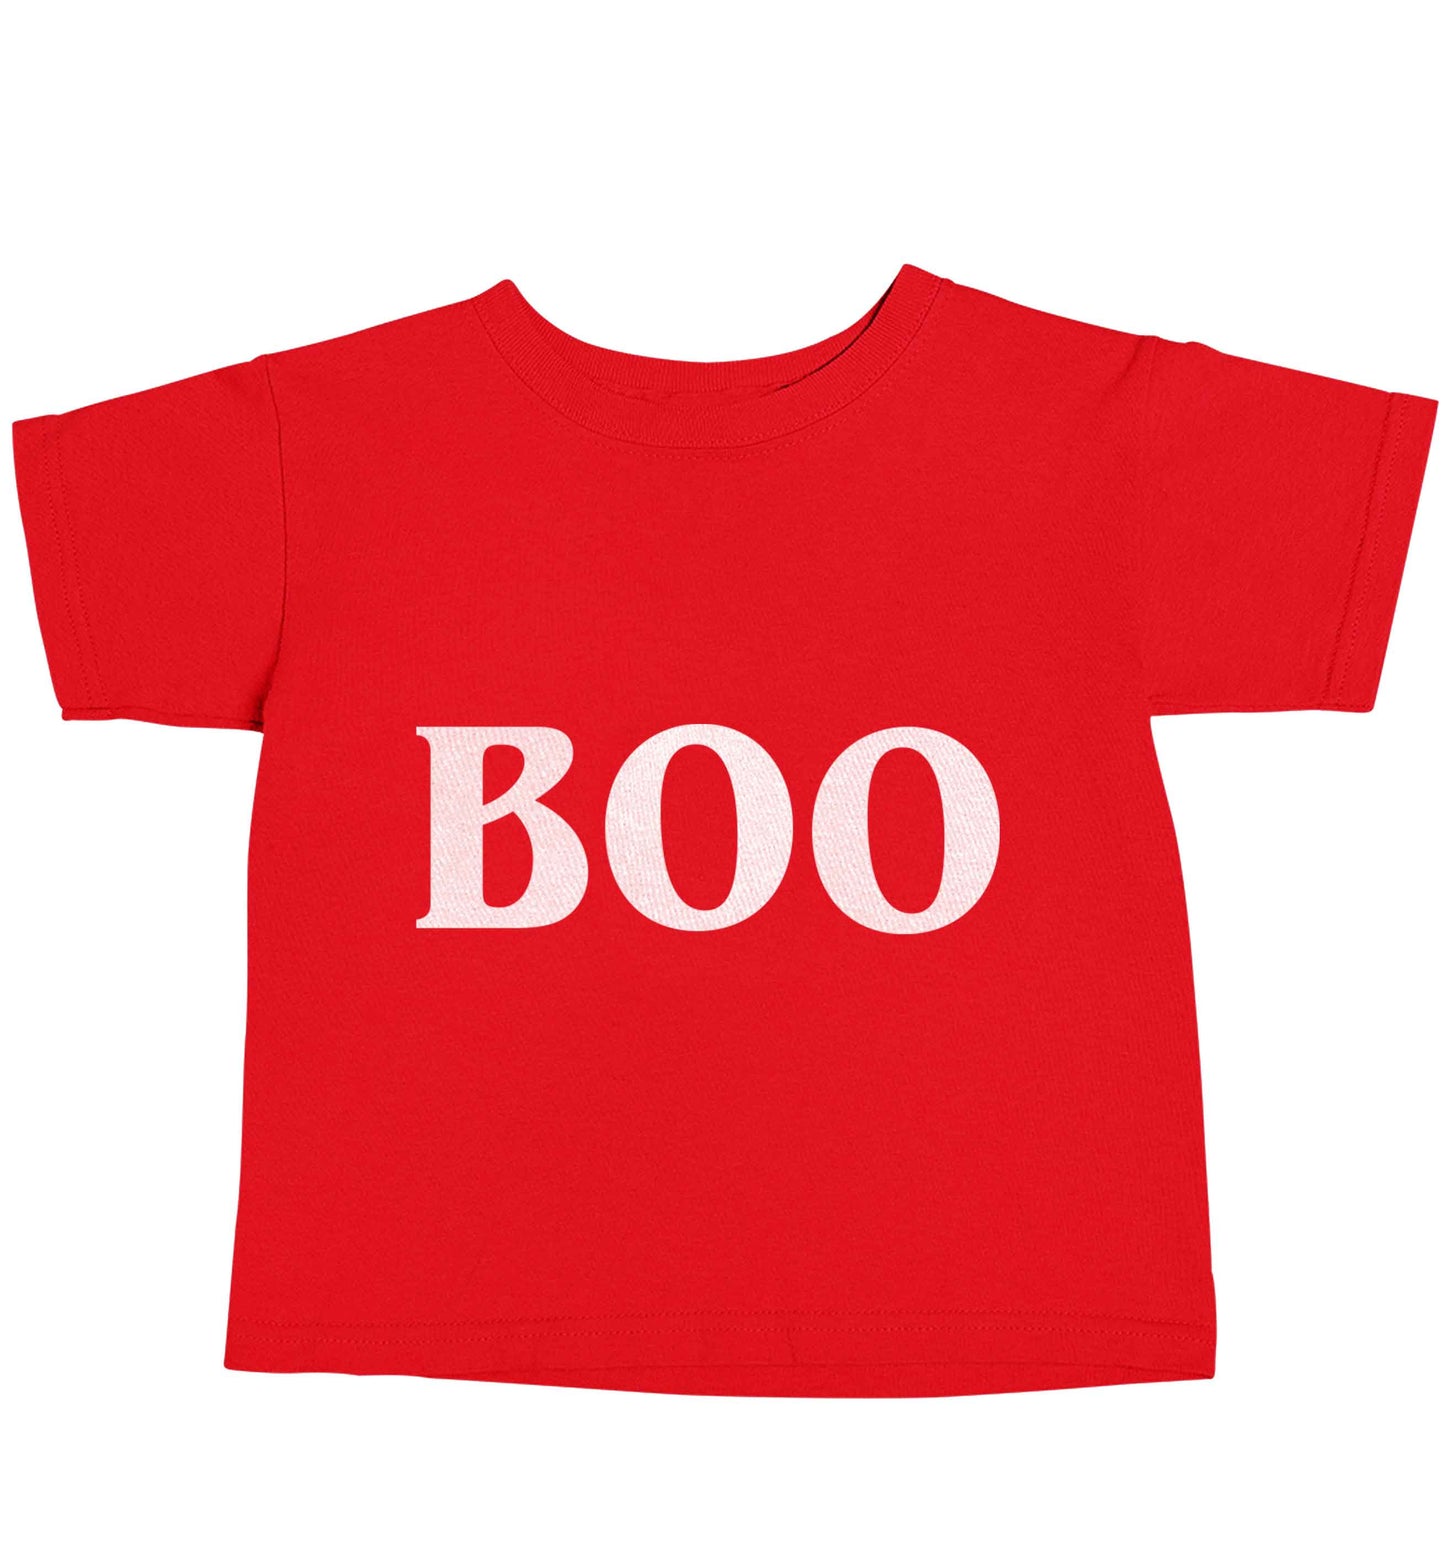 Boo red baby toddler Tshirt 2 Years